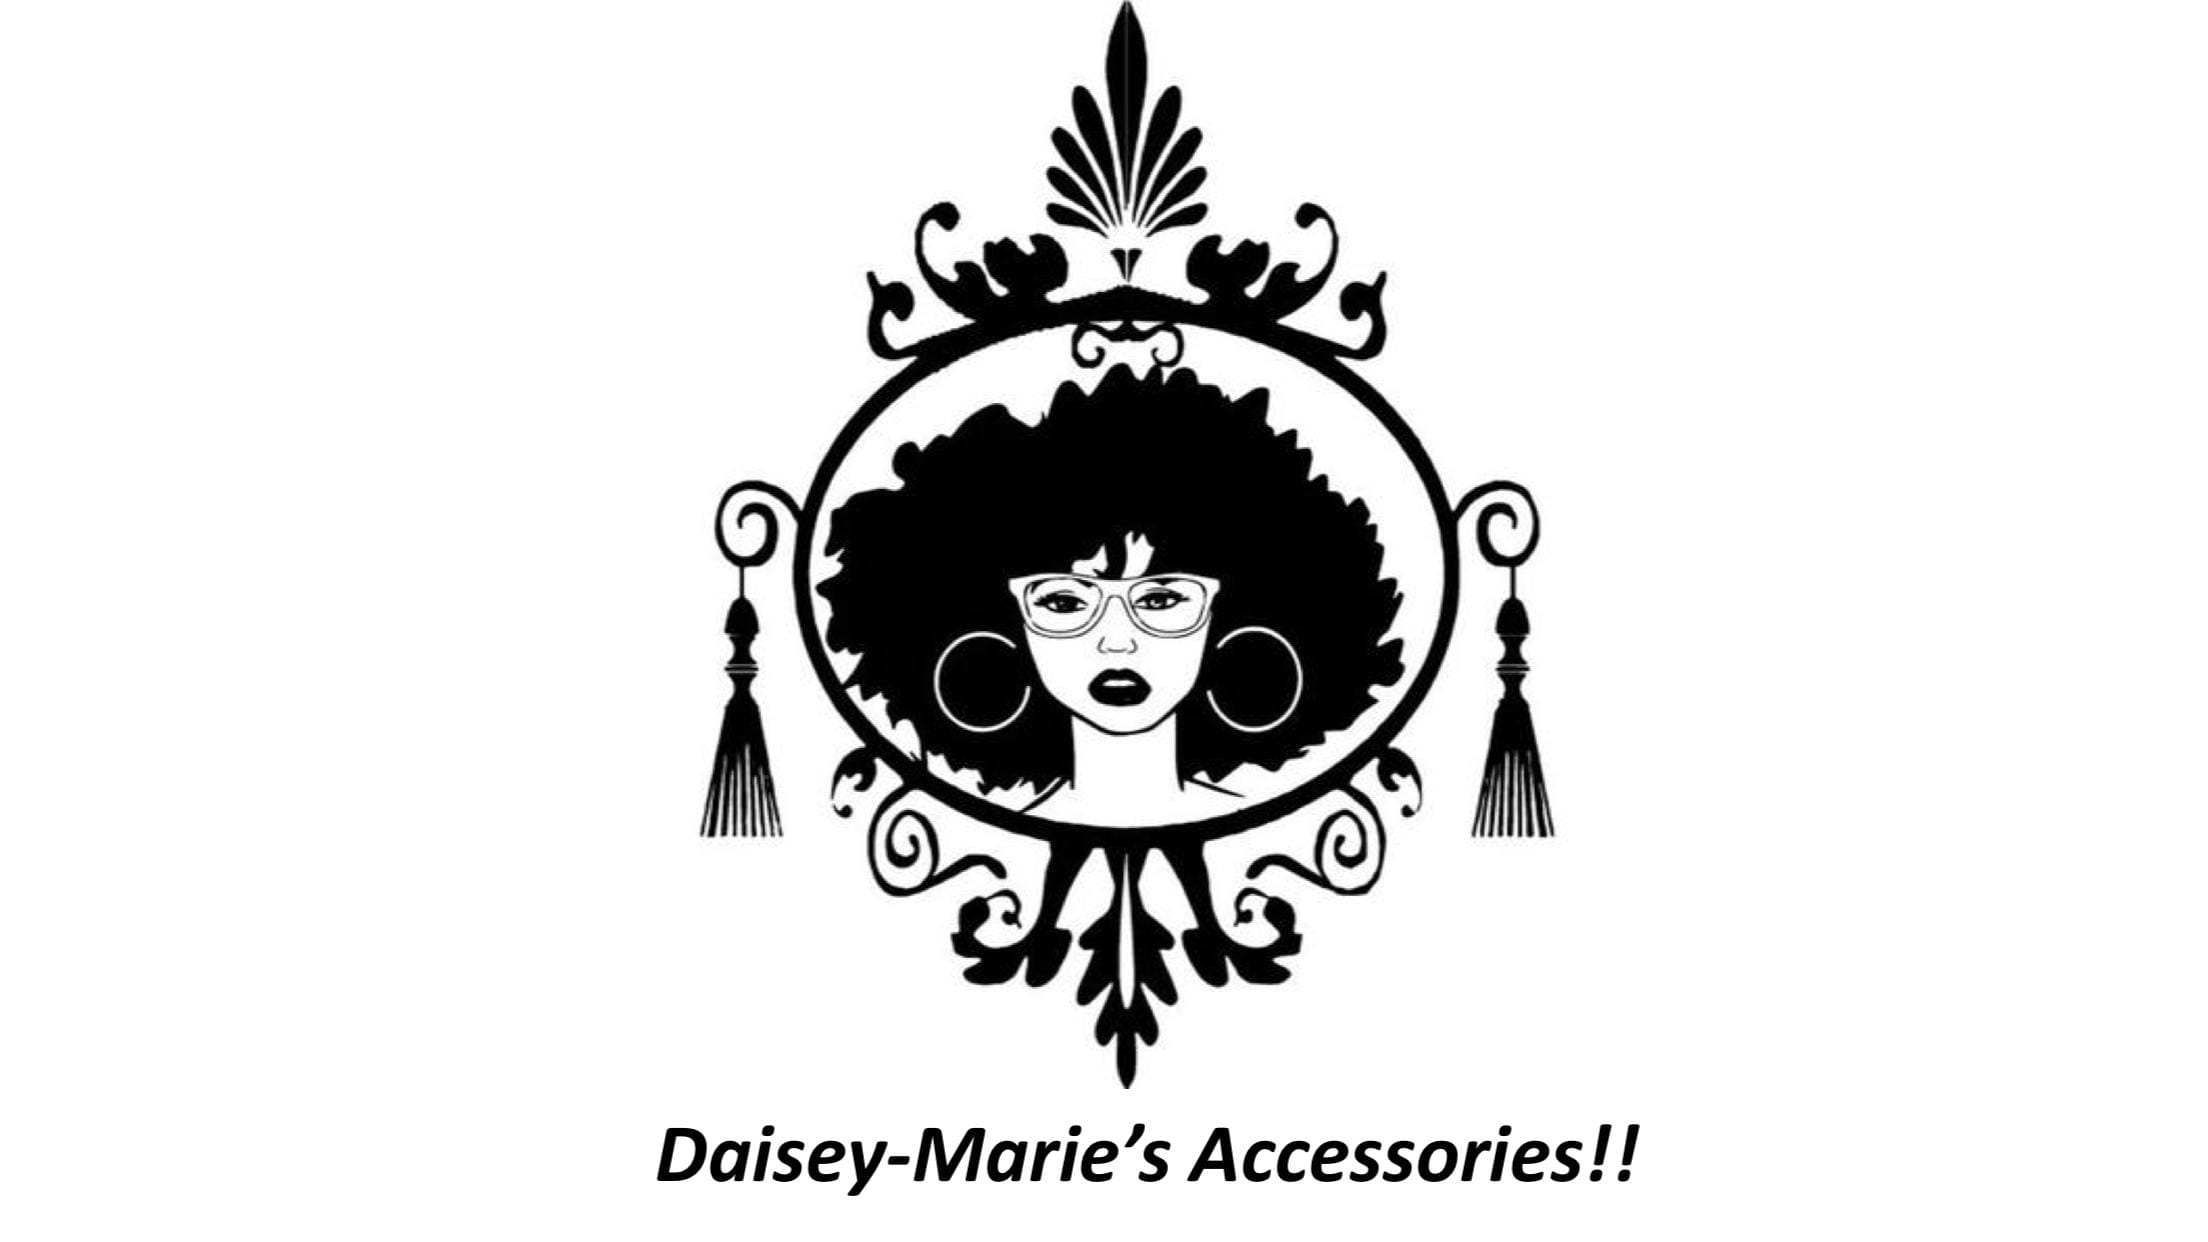 Daisey-Marie’s Accessories